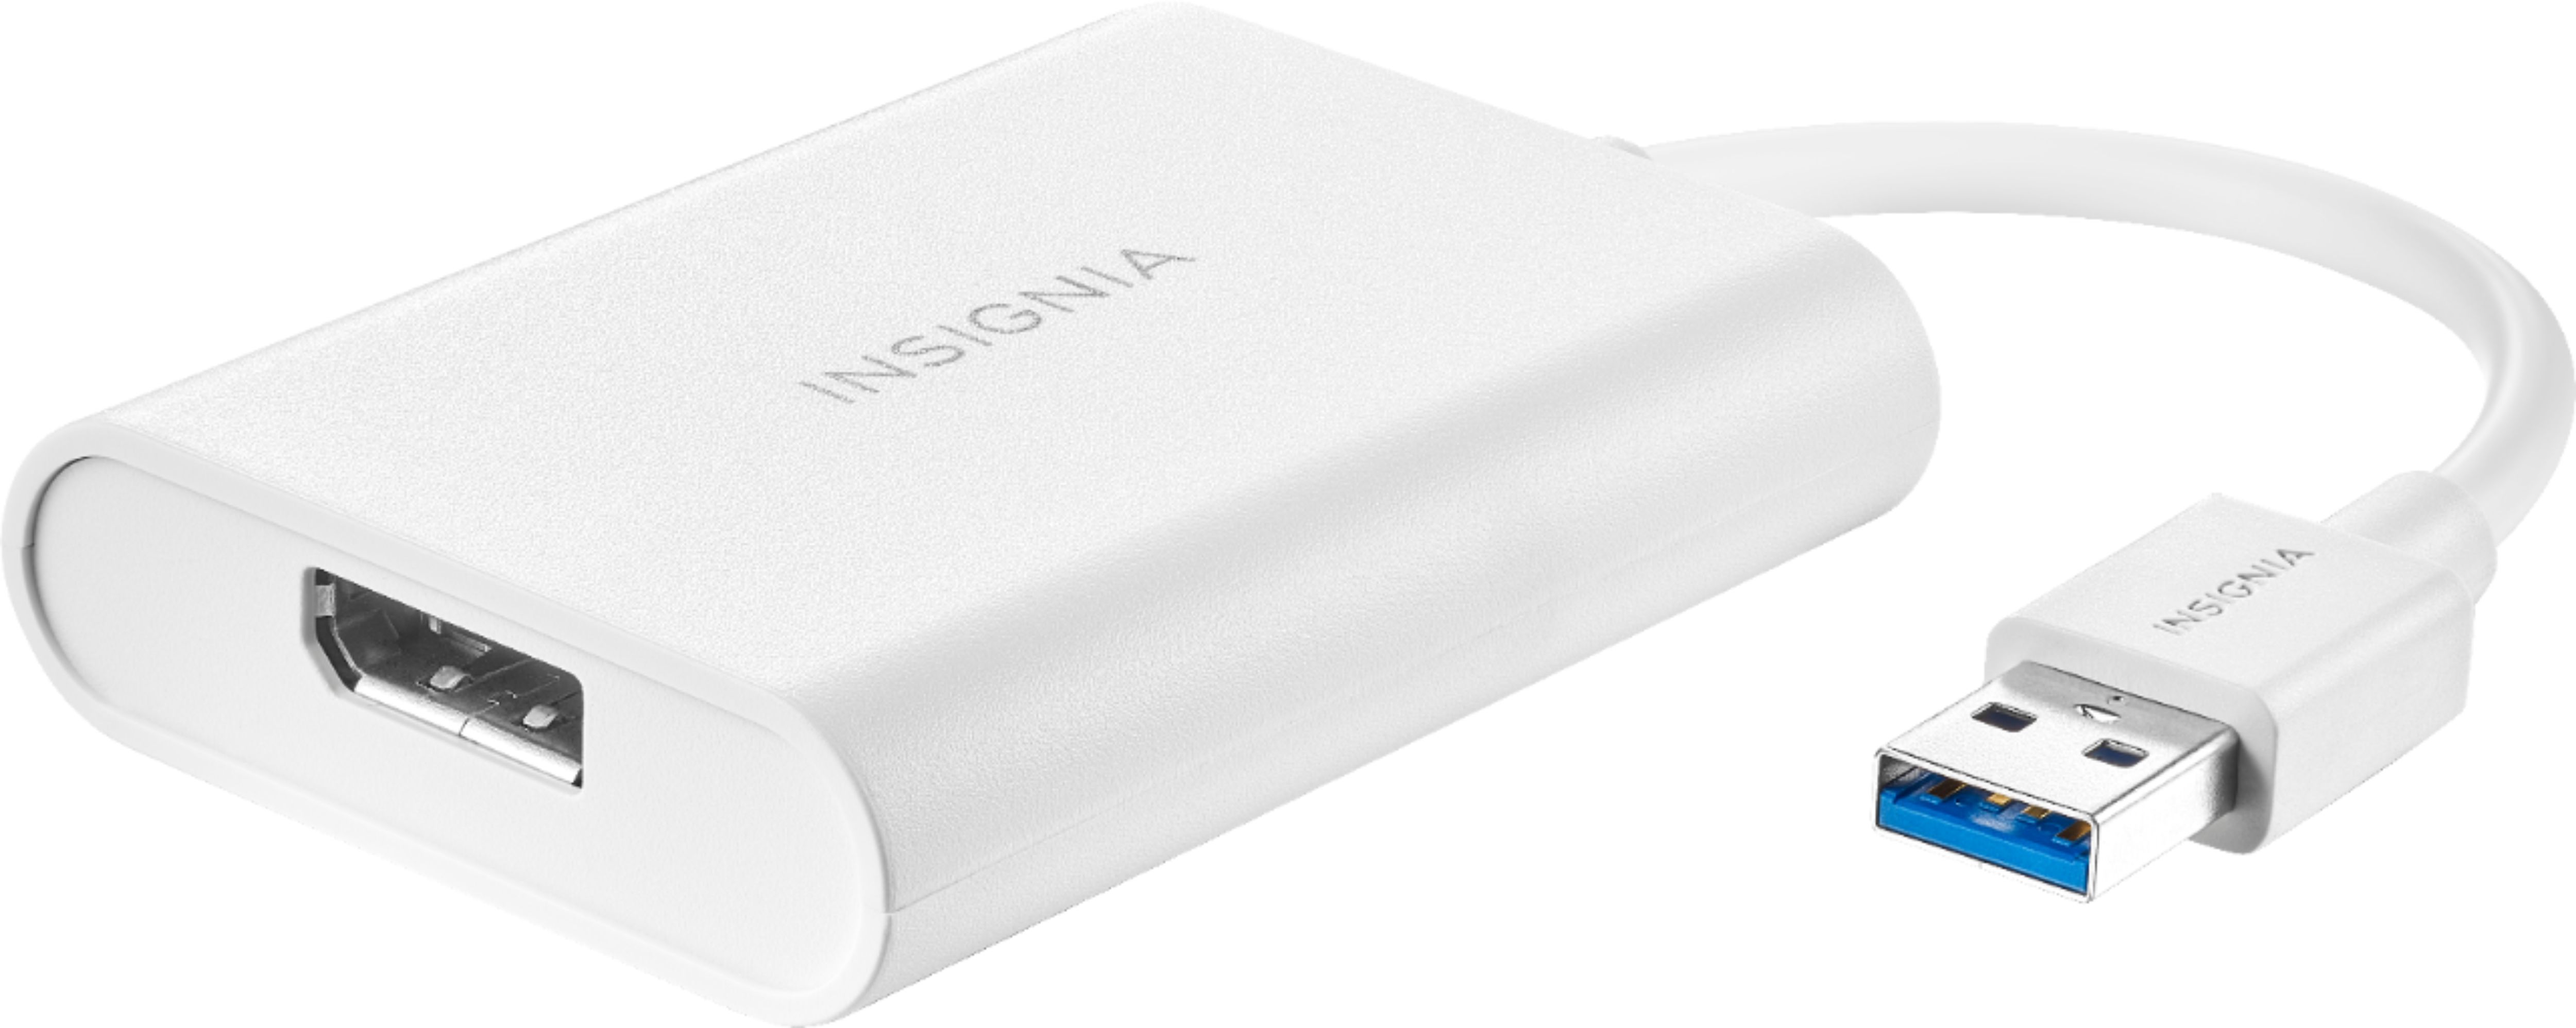 Insignia™ USB 3.0 to DisplayPort Adapter White NS-PCA3D - Best